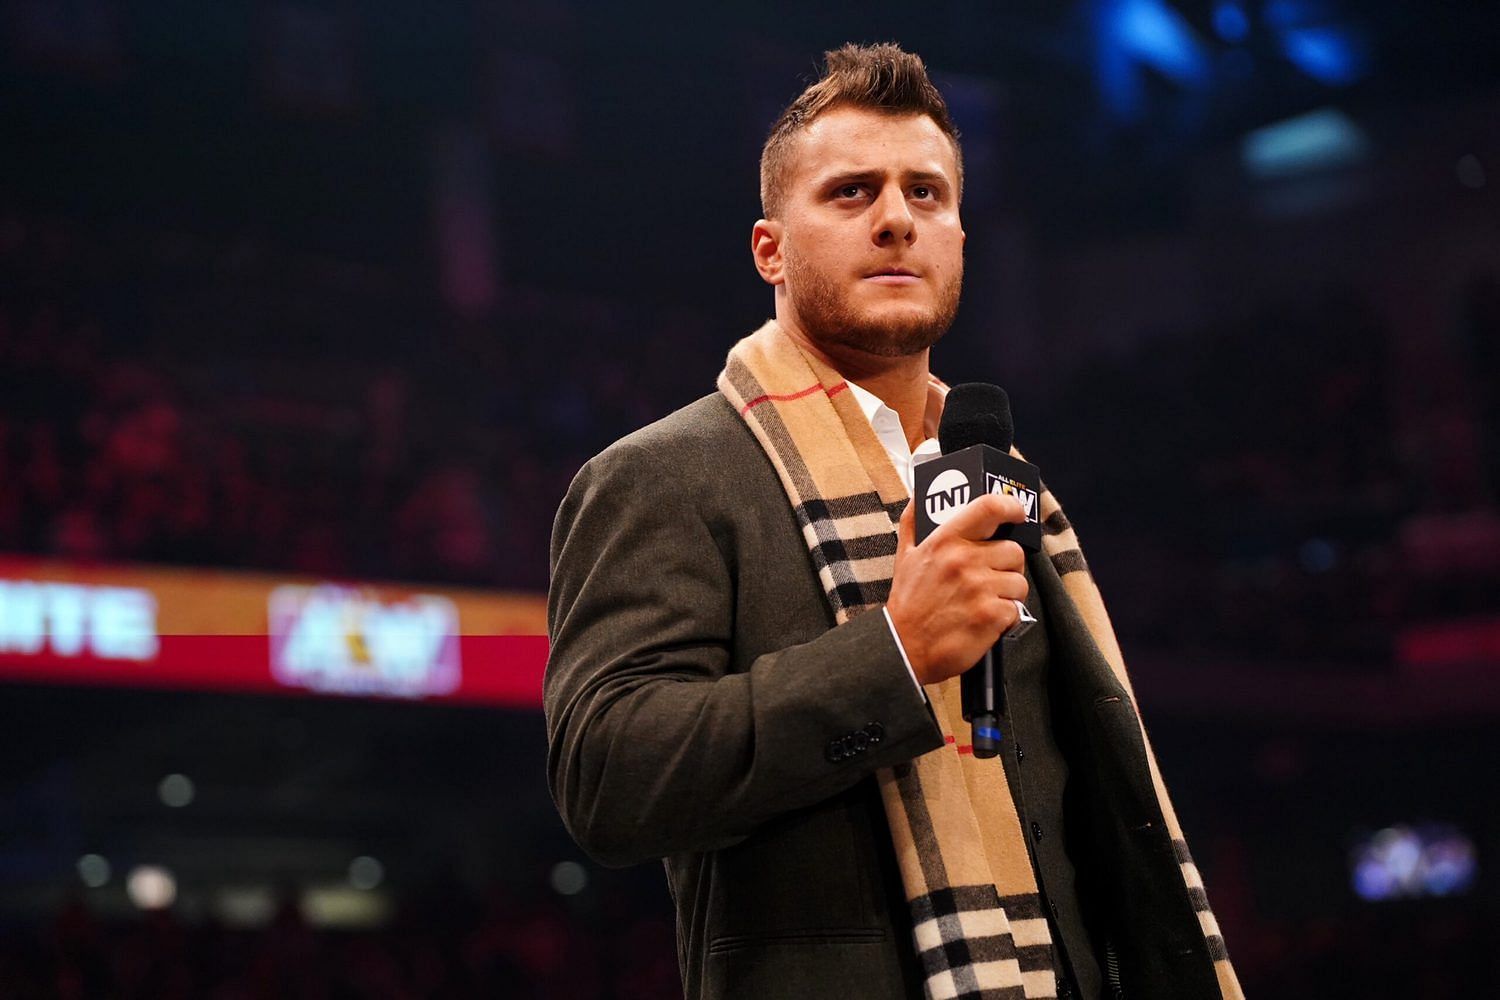 MJF is having a contract issued with All Elite Wrestling.